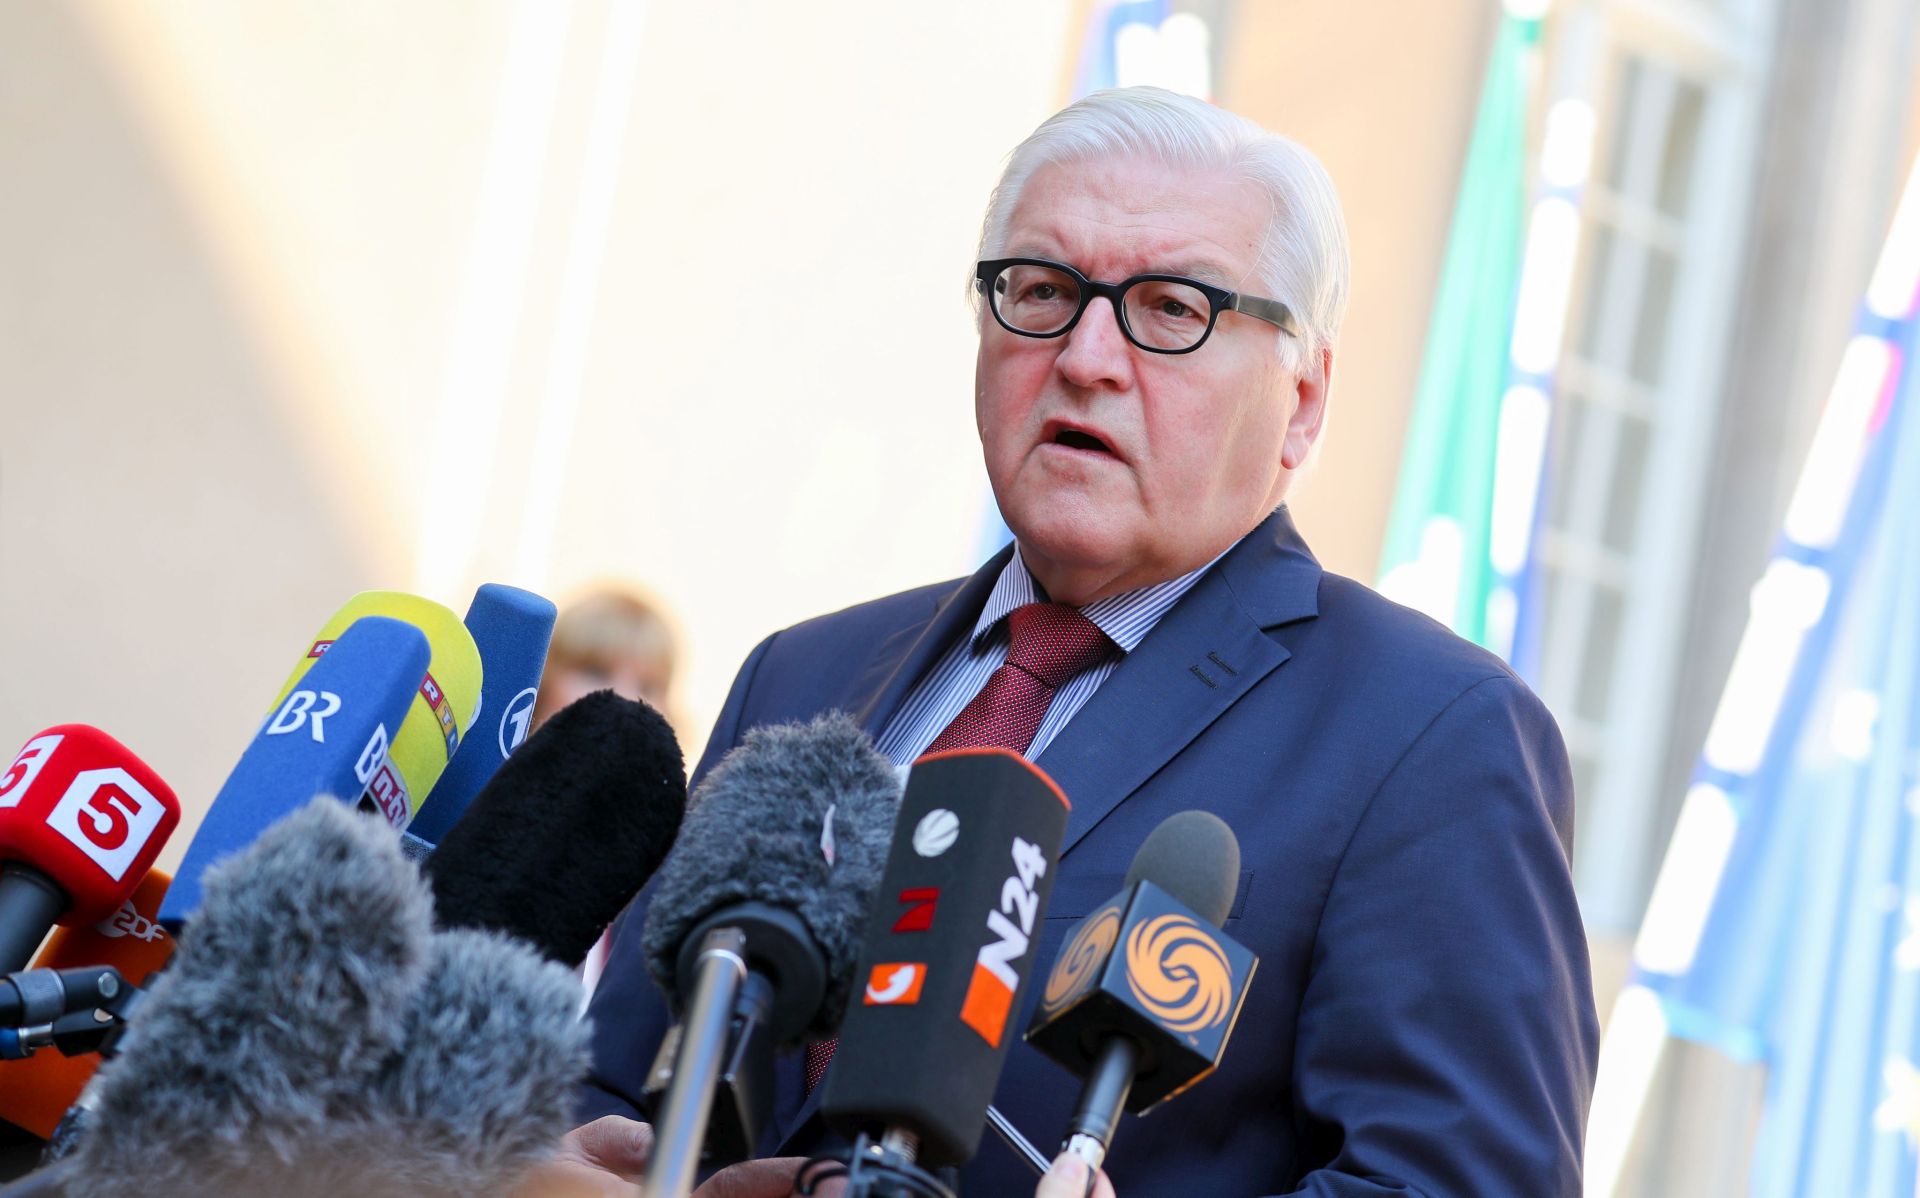 epa05388962 German Foreign Minister Frank-Walter Steinmeier speaks to the press at the Villa Borsig in Berlin, Germany, 25 June 2016. The Foreign Ministers of the six founding members of the EU (Belgium, France, Germany, Italy, Luxembourg and the Netherlands) met one day after the outcome of the referendum on the British EU membership. A slim majority of 51.9 percent voted in favor of leaving the European Union.  EPA/KAY NIETFELD